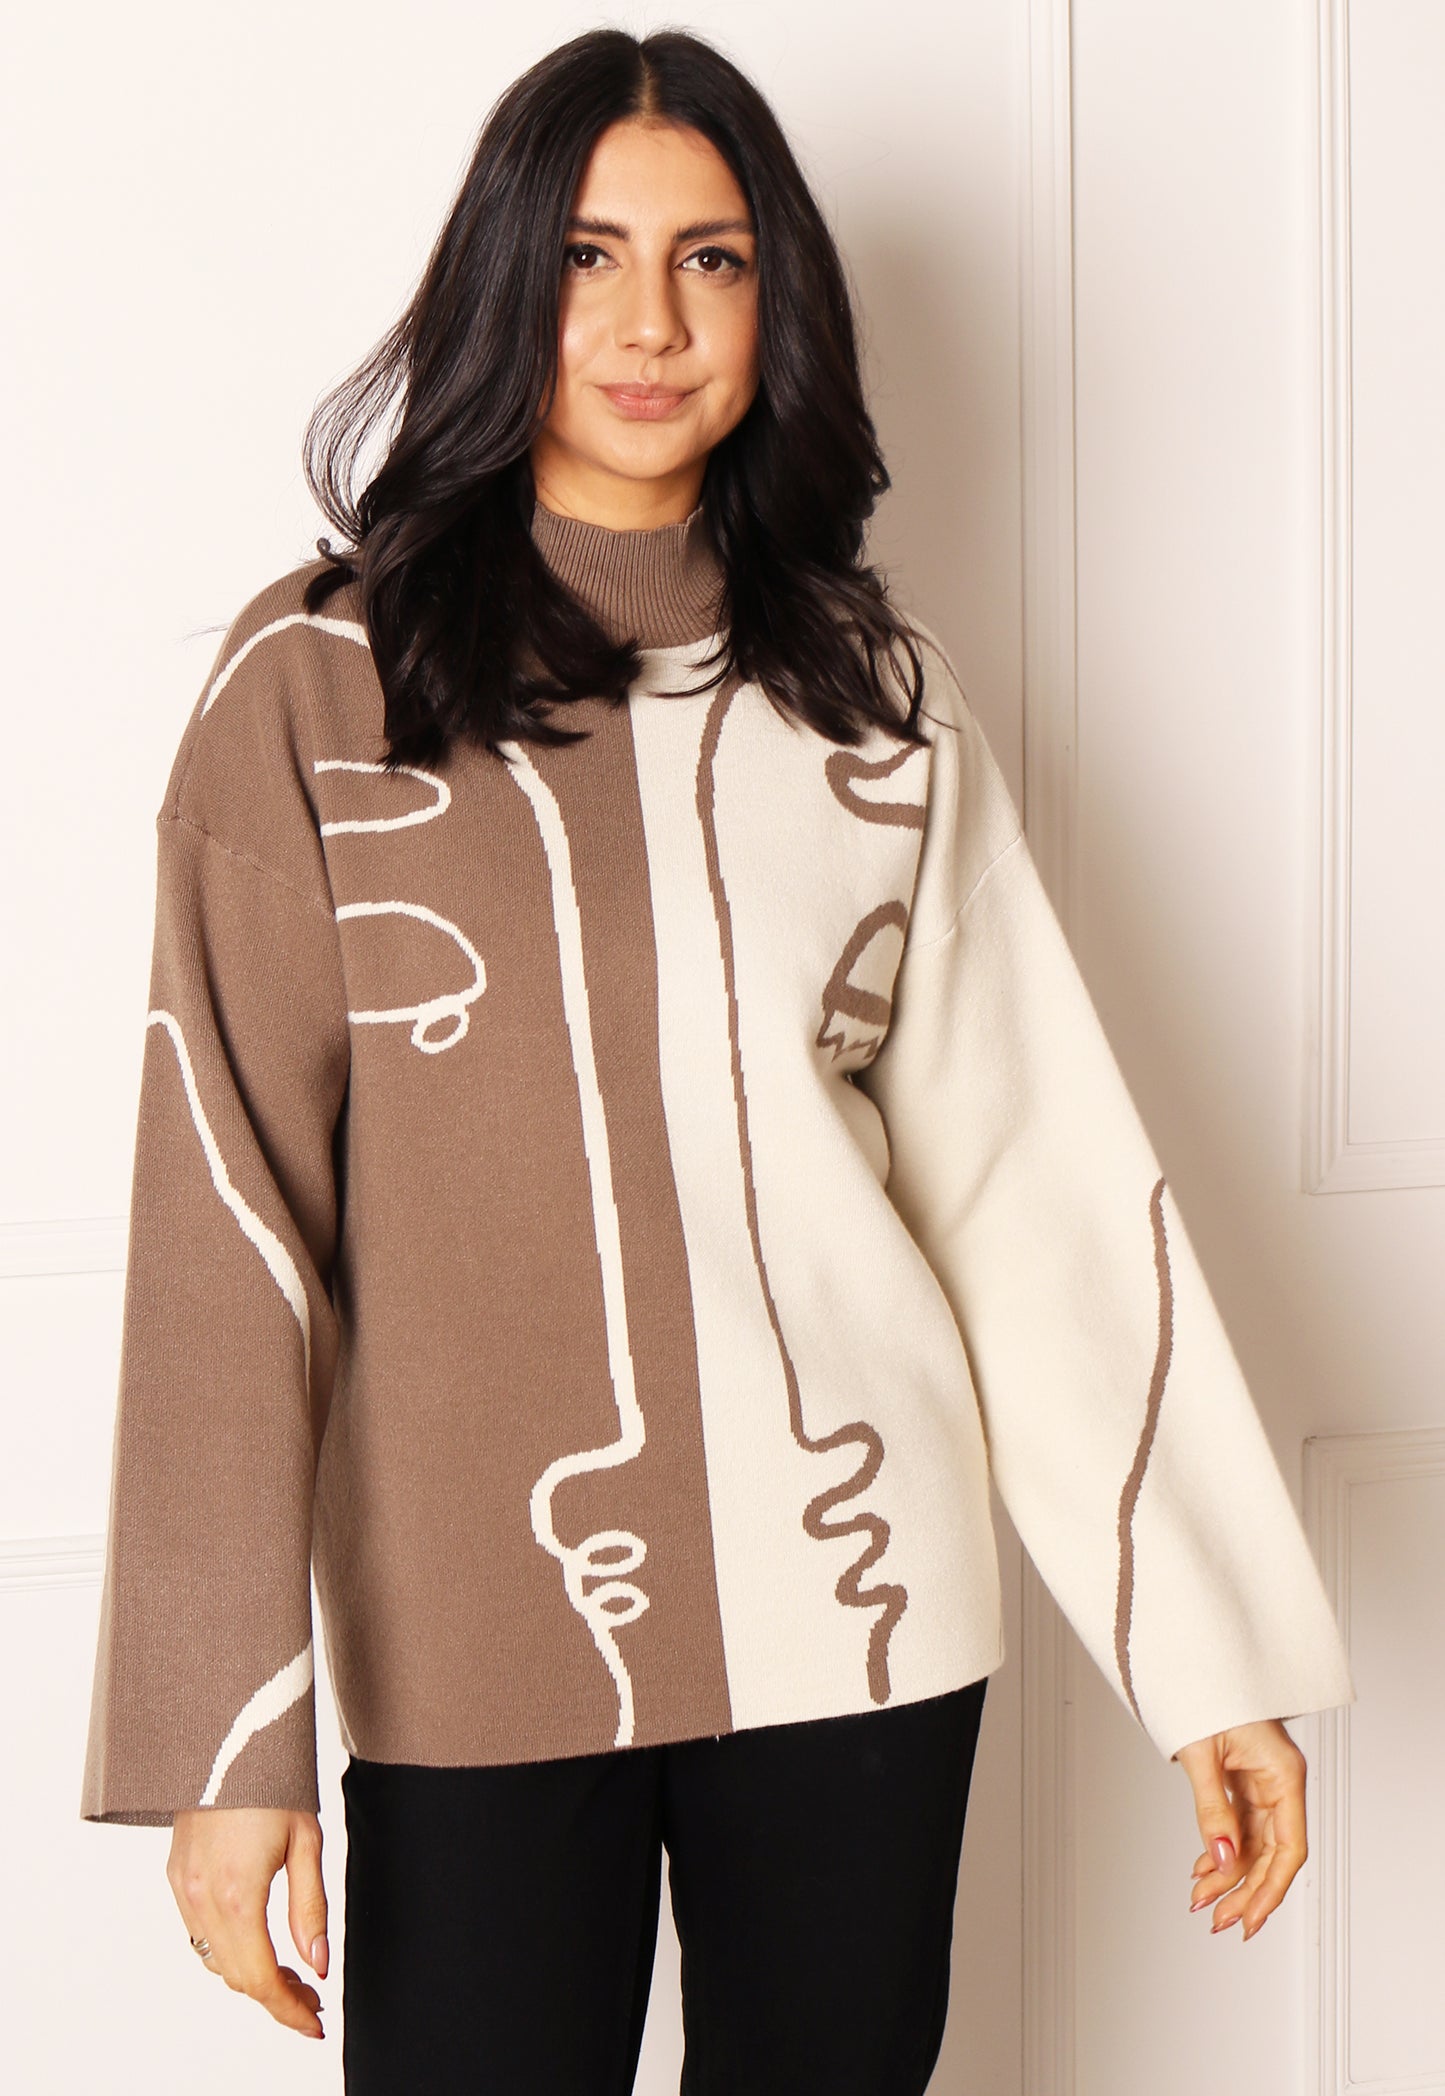 VILA Mee Abstract Faces Two Tone Jumper with Turtle Neck in Cream & Mocha - vietnamzoom